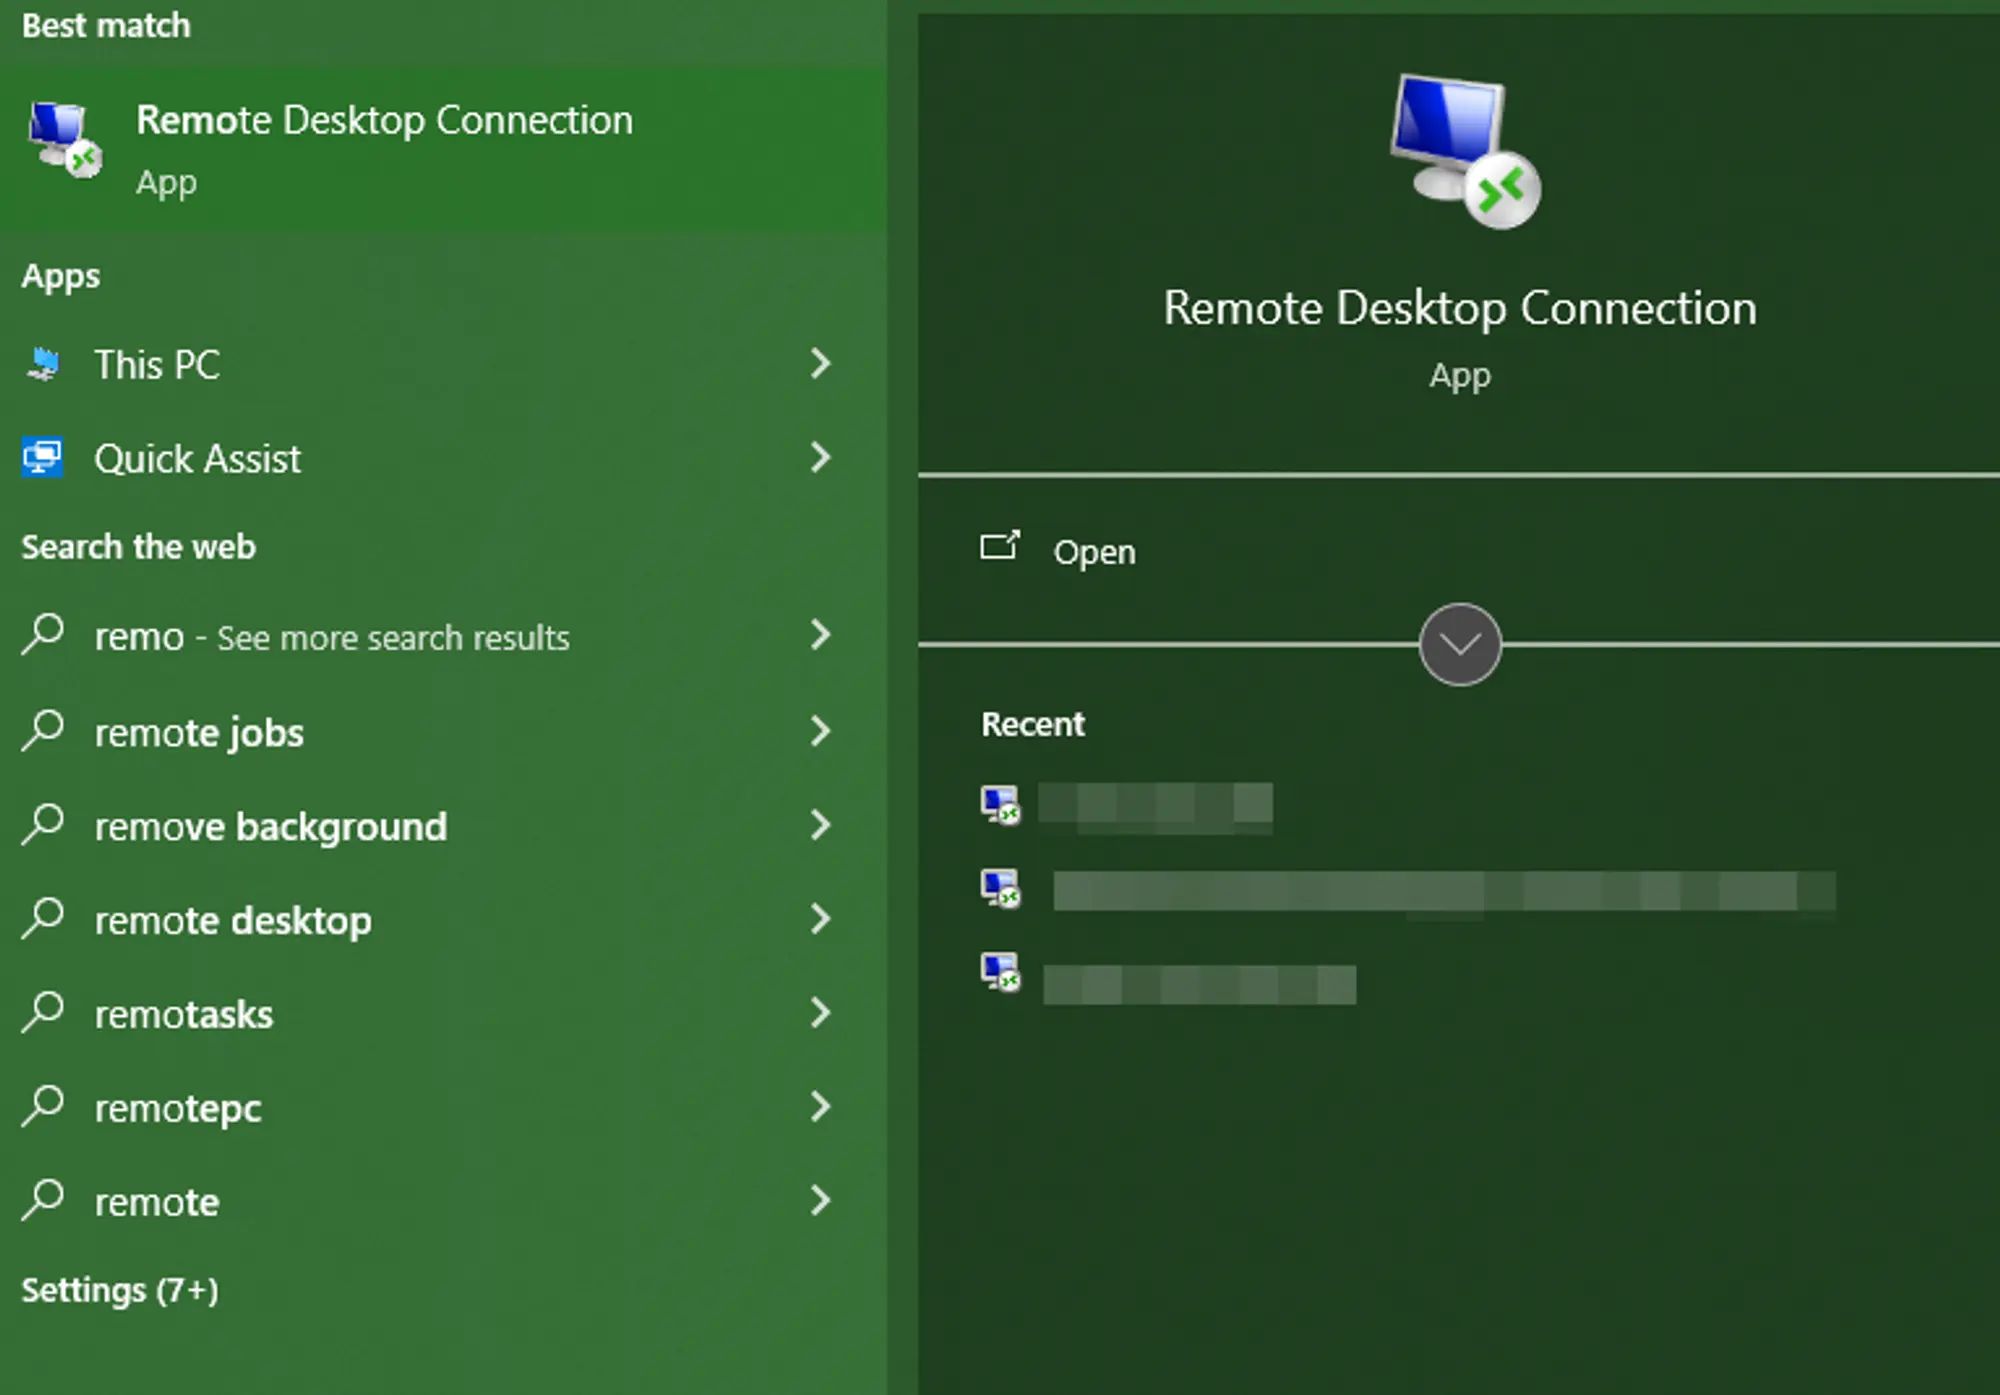 The windows start menu with “Remo” typed into to the search field, showing the “Remote Desktop Connection” program as the first result.